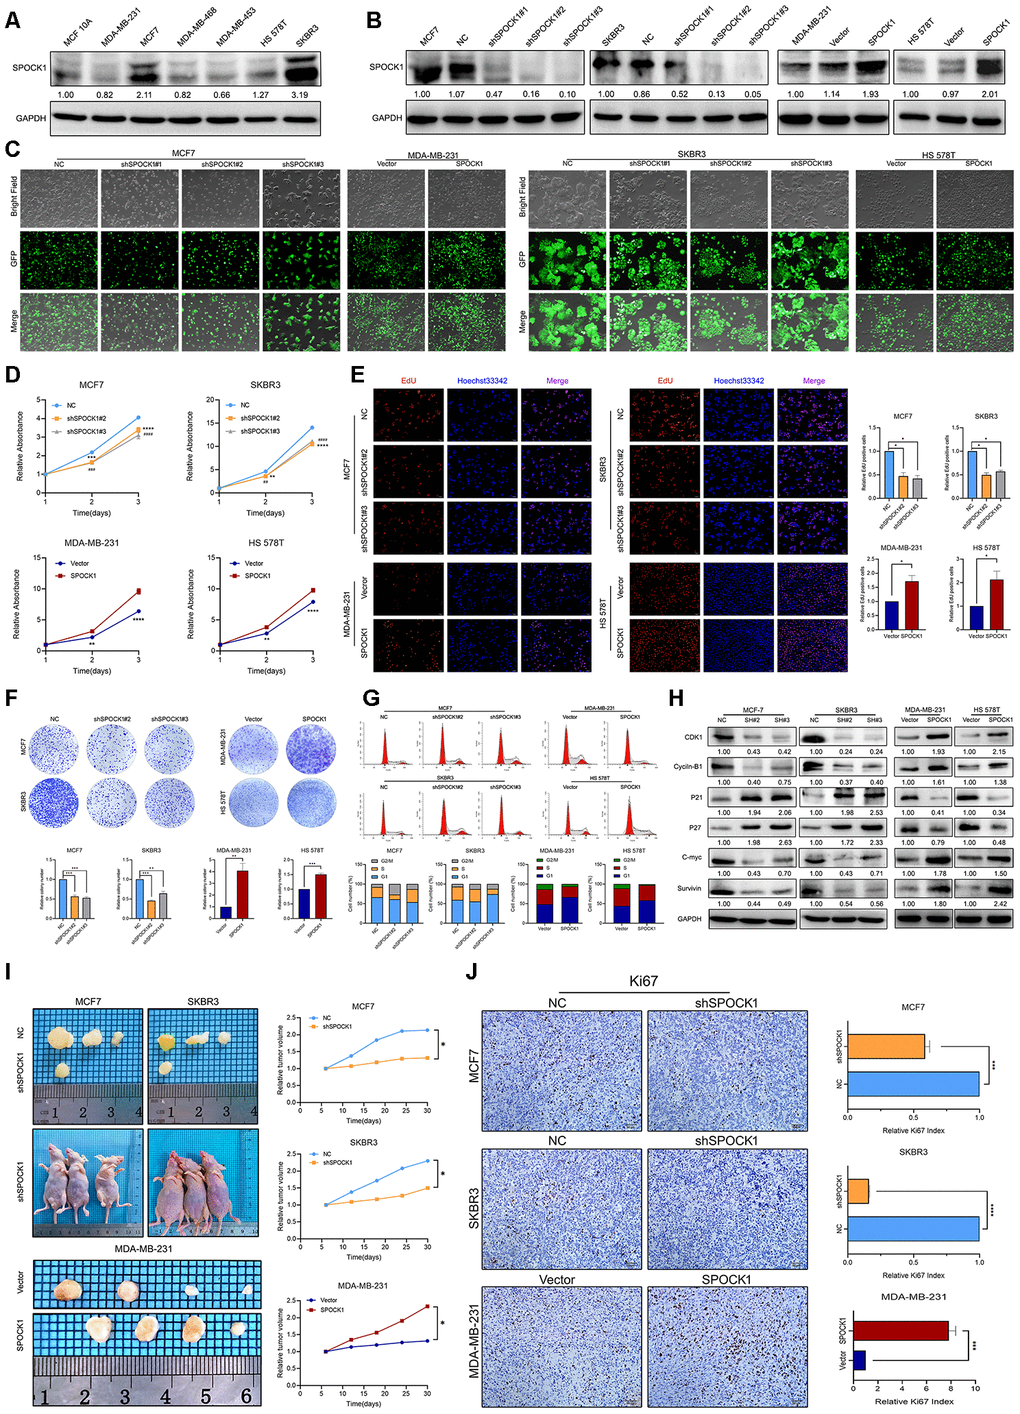 SPOCK1 influences BC cell growth. (A) Protein expression levels of SPOCK1 in BC cell lines as determined by western blot analysis. (B) MCF7/SKBR3 cells with SPOCK1 silencing and MDA-MB-231/HS 578T cells with SPOCK1 overexpression were established by viral transduction. The SPOCK1 levels in these established cell lines were verified by western blot analysis at 48 h after transfection. (C) Cells in bright light and GFP were captured to merge for displaying the transfection efficiency. (D) Cell viability was examined by MTT assay. (E) Results of EdU assay on BC cells. Representative photographs are shown at the original magnification, ×100. (F) Cell clonogenic capacity was measured by colony formation assay. (G) Flow-cytometry analysis was performed to detect cell cycle progression. (H) The expression of proteins related cell cycle (CDK1, Cyclin-B1, P21, P27, C-mvc and Survivin) was determined by western blot analysis. GAPDH was used as a loading control. (I) Xenograft tumors formed by injecting the indicated cells. Relative tumor volume curves were summarized in the line chart (*PJ) IHC staining of the proliferation marker Ki67 in xenograft tumors. The relative percentage of Ki67-positive cells was summarized in the bar charts. The P values were obtained using t-tests (***PP